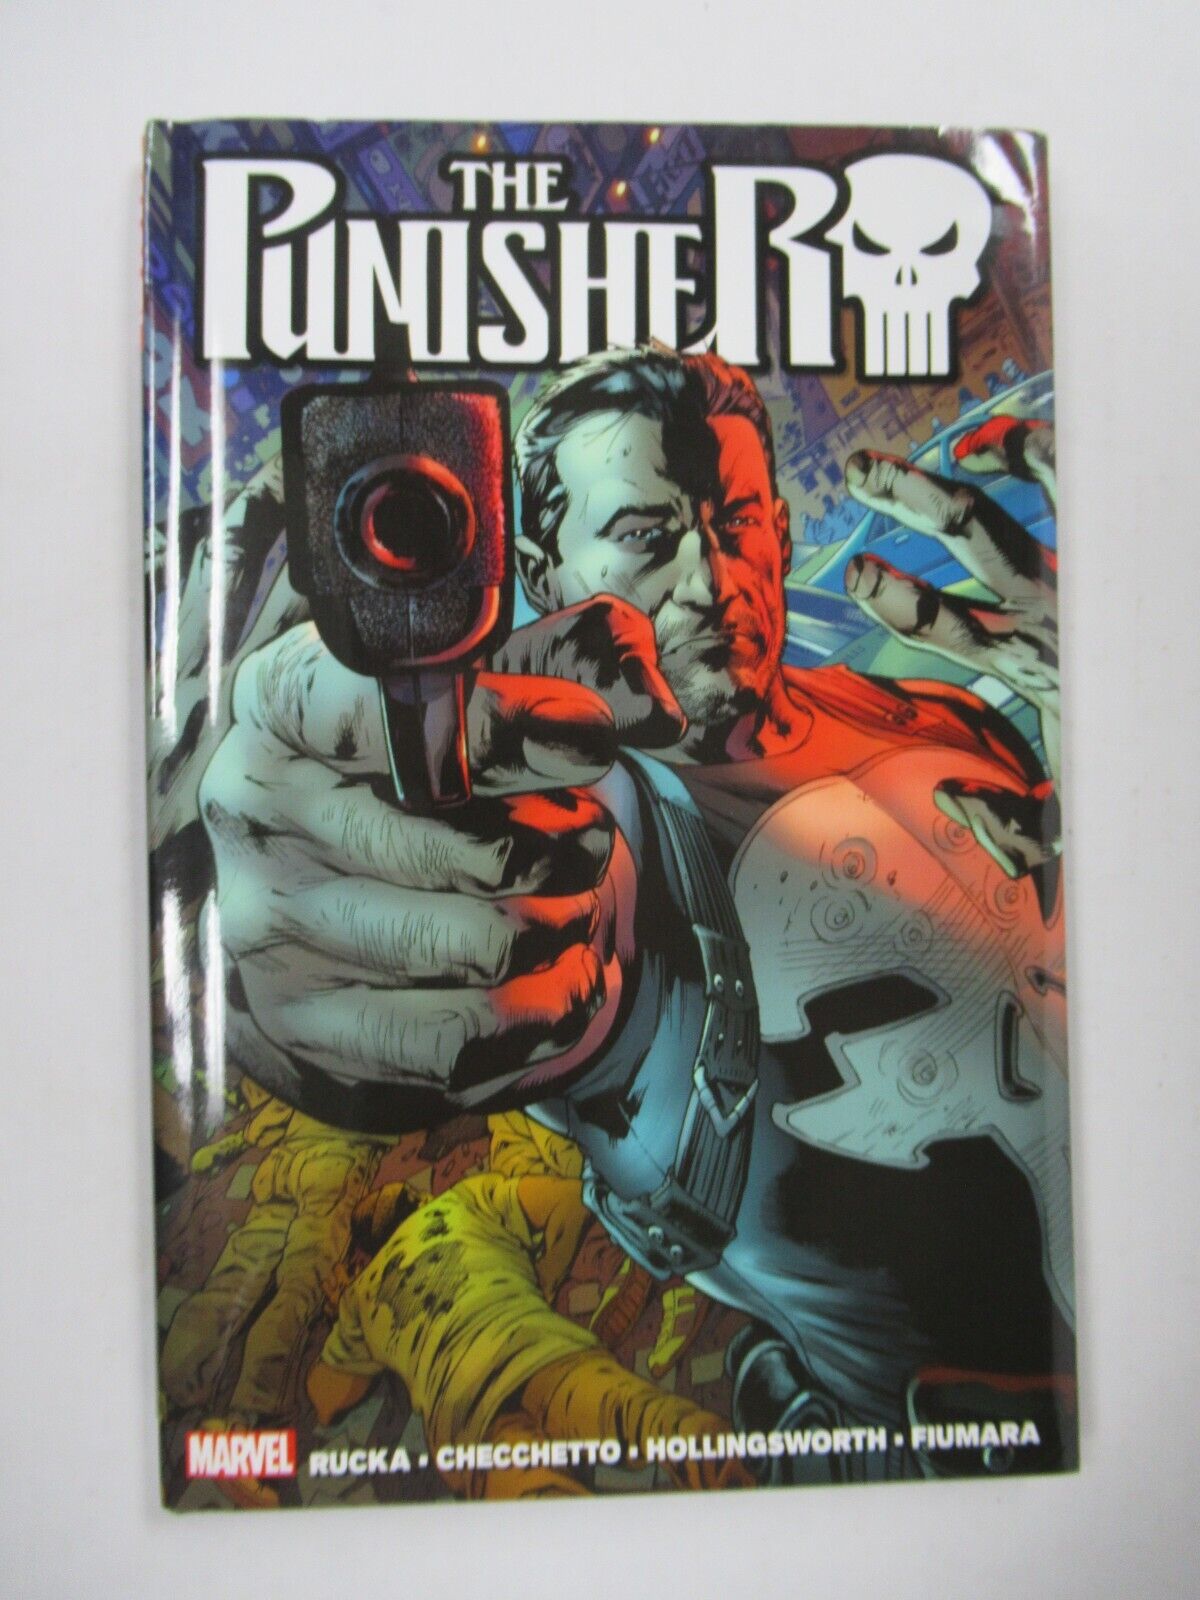 Marvel Comics The Punisher Vol 1 by Greg Rucka HC Hardcover